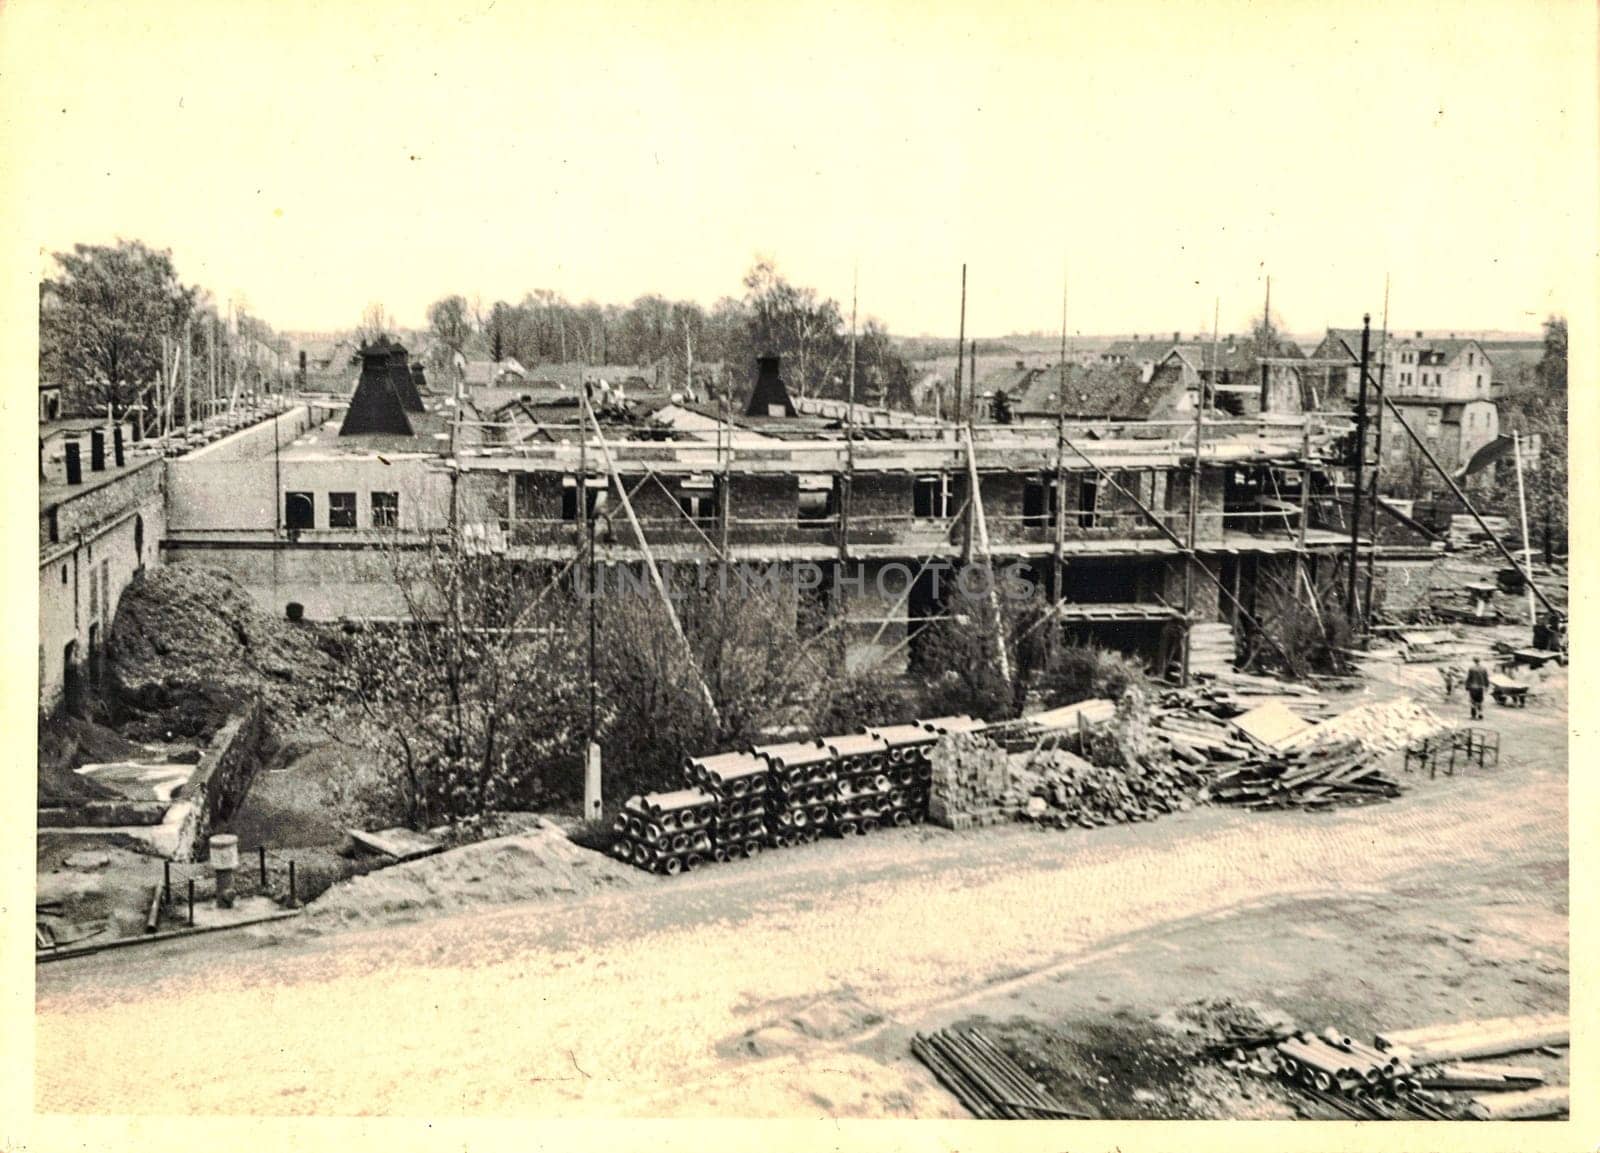 FRAUREUTH, EAST GERMANY - MAY 7, 1965: The retro photo shows construction site in Communist bloc. Former East Germany, 1960s.